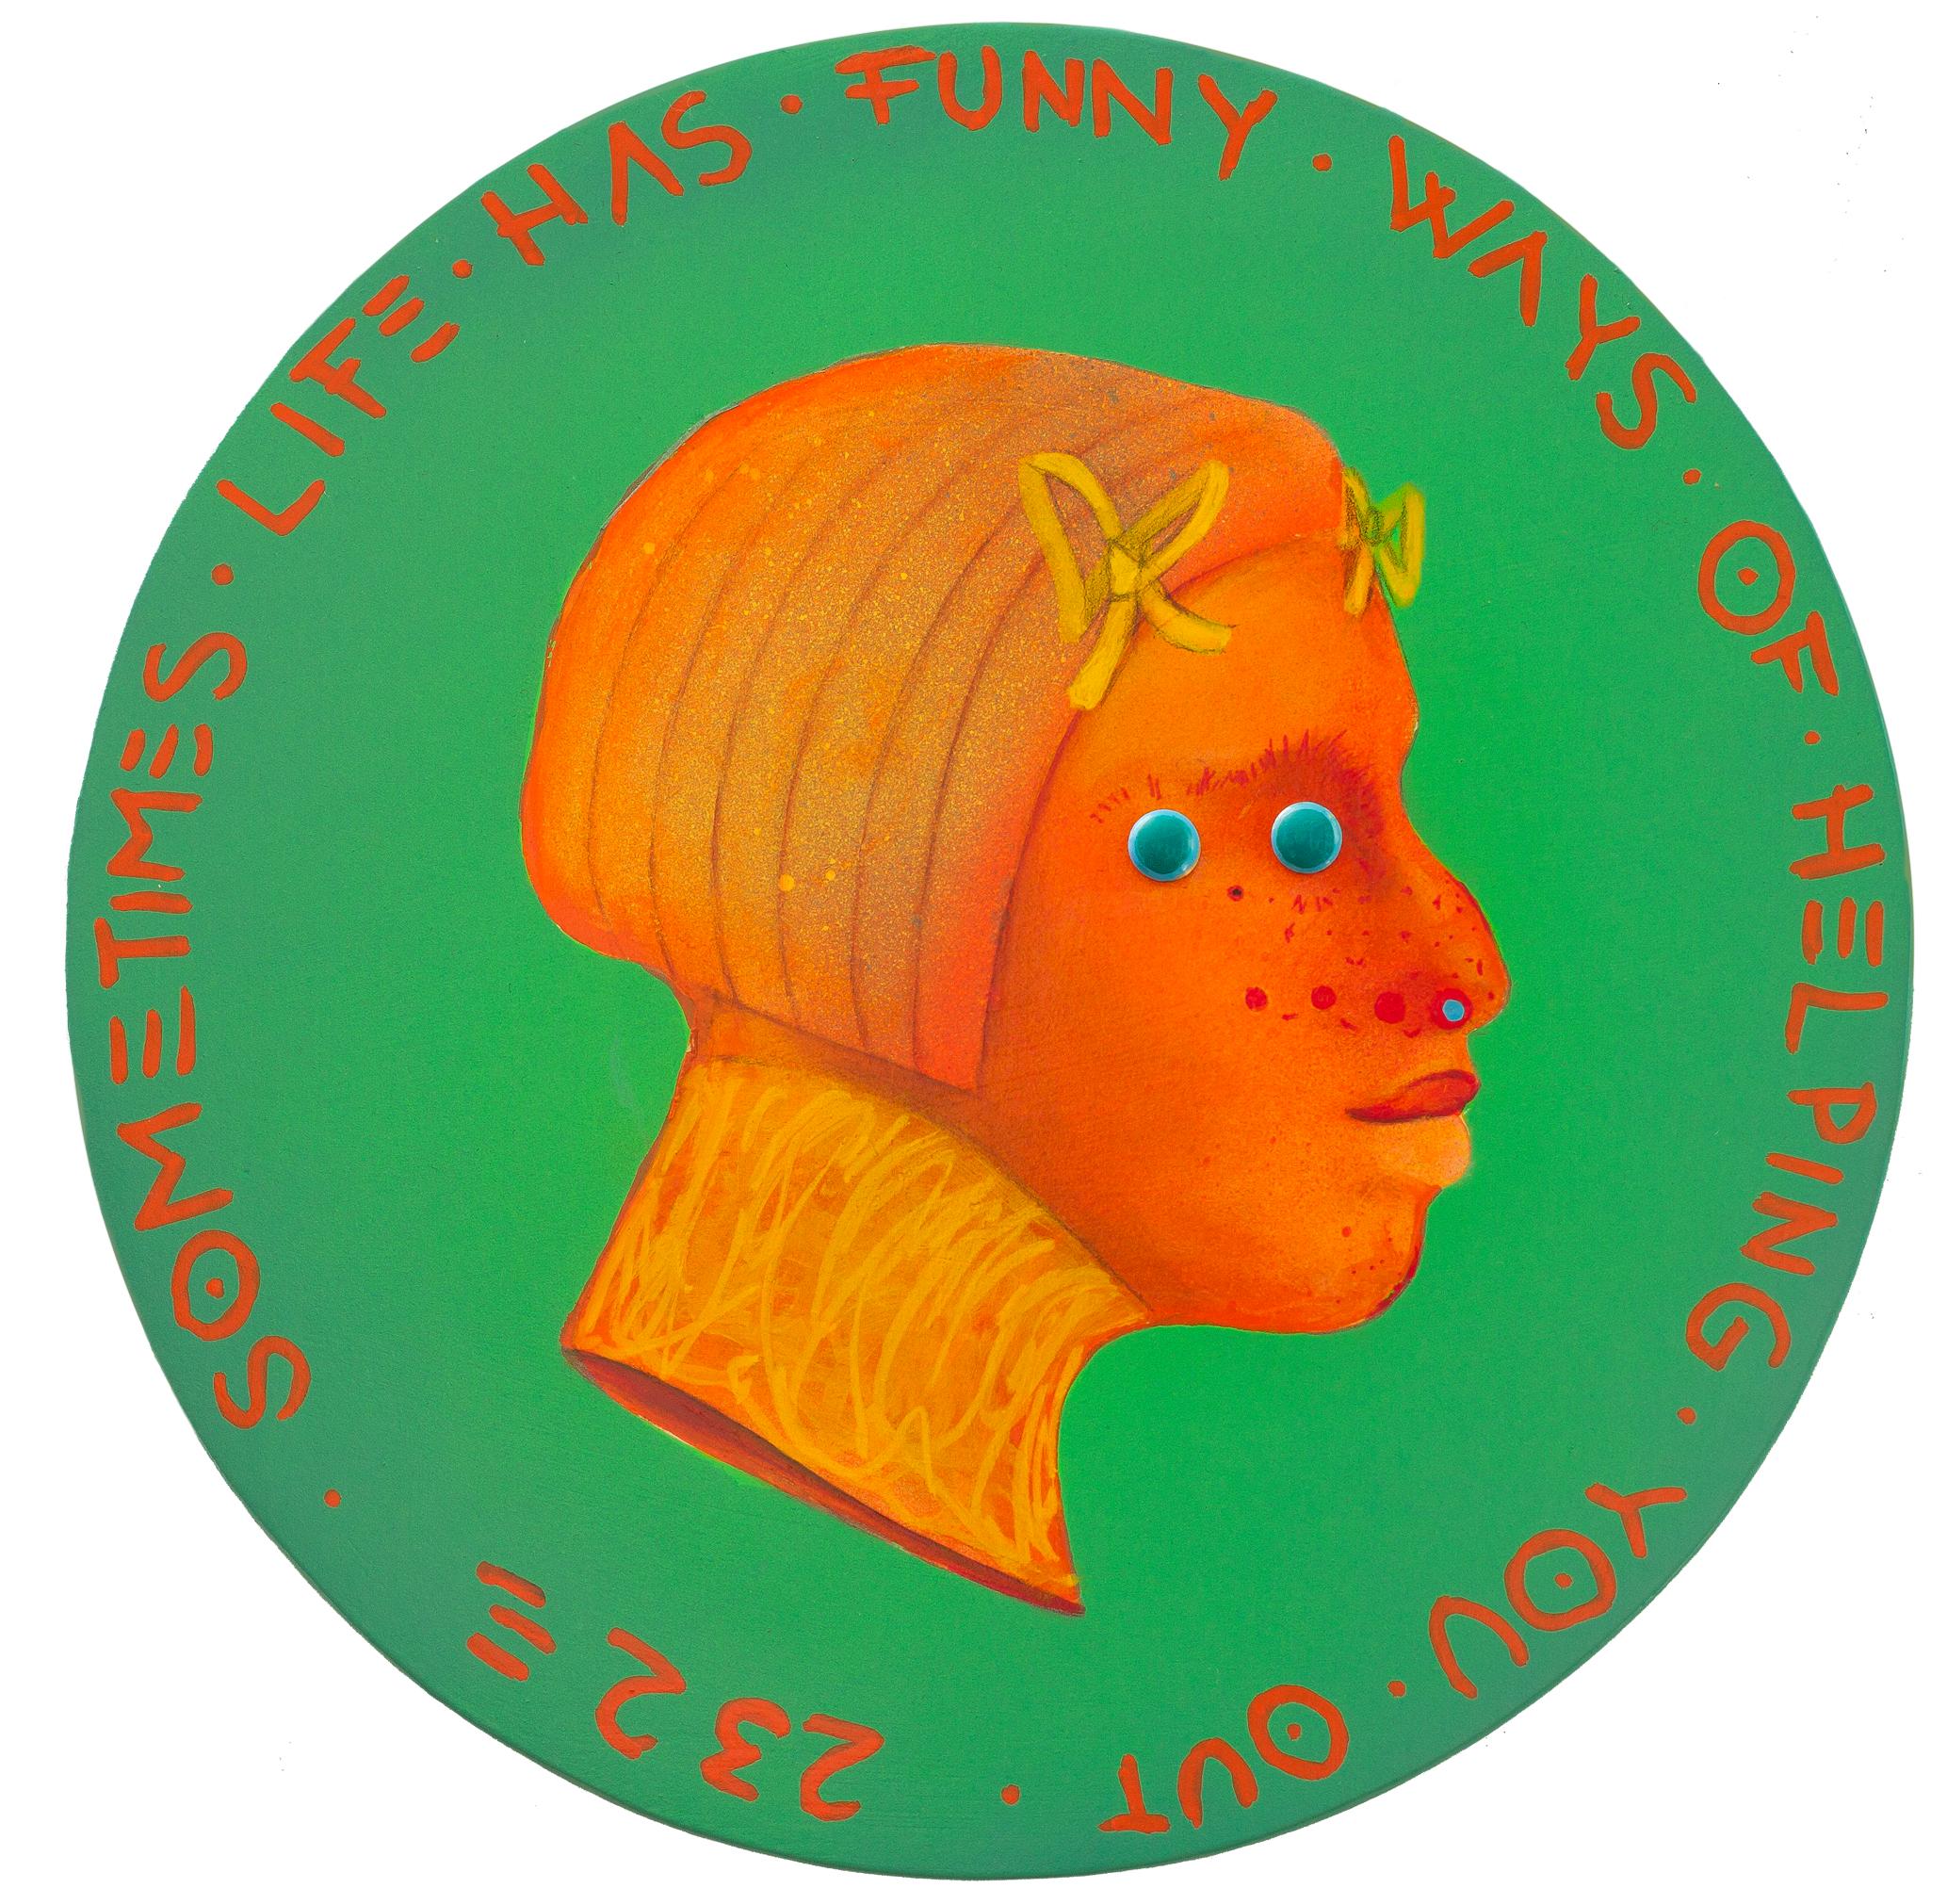 Contemporary Pop Surrealist Colorful Face Coin. Naive   "Currency #215"